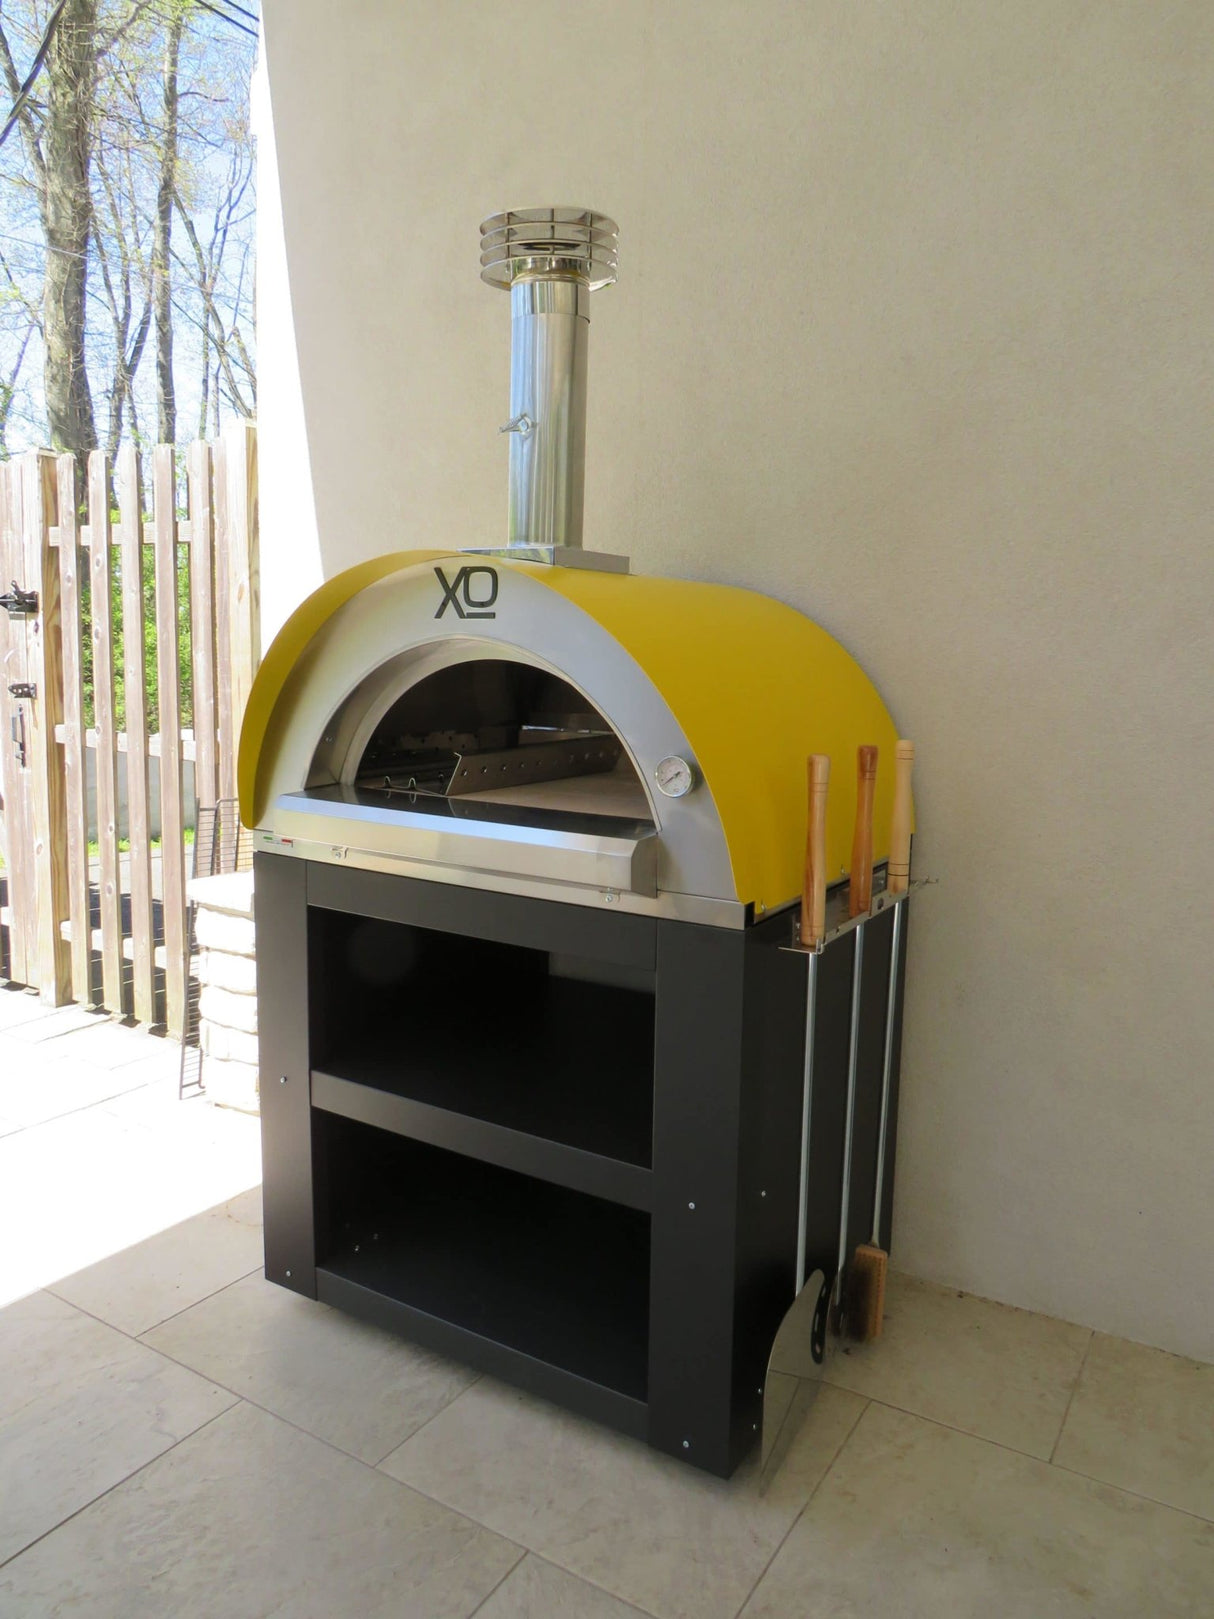 XO 40 Inch Wood-Fired Outdoor Pizza Oven Freestanding On Cart